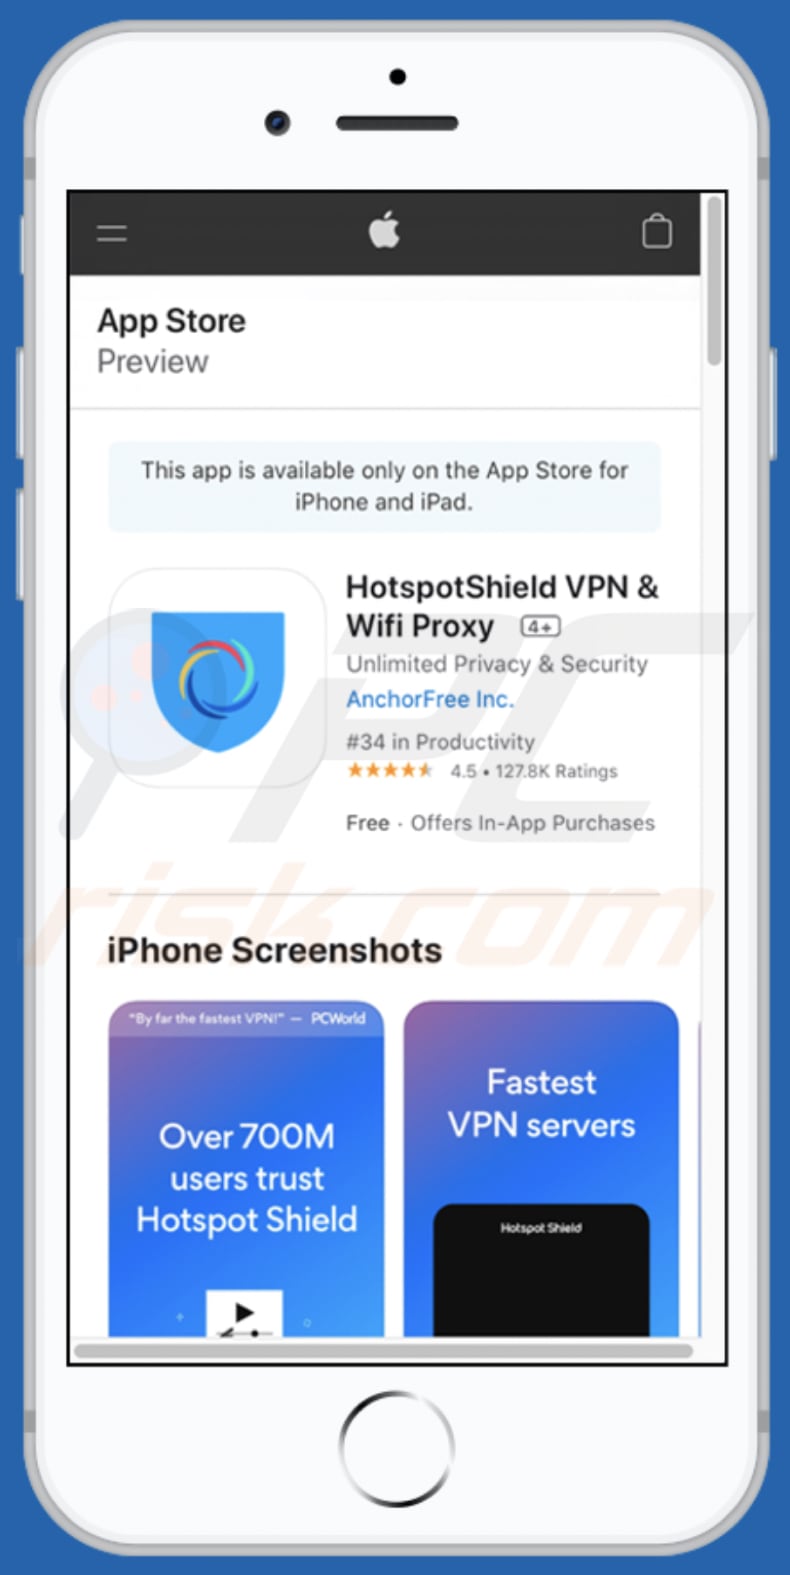 crypt-protection.com pop-up scam app promoted on second variant